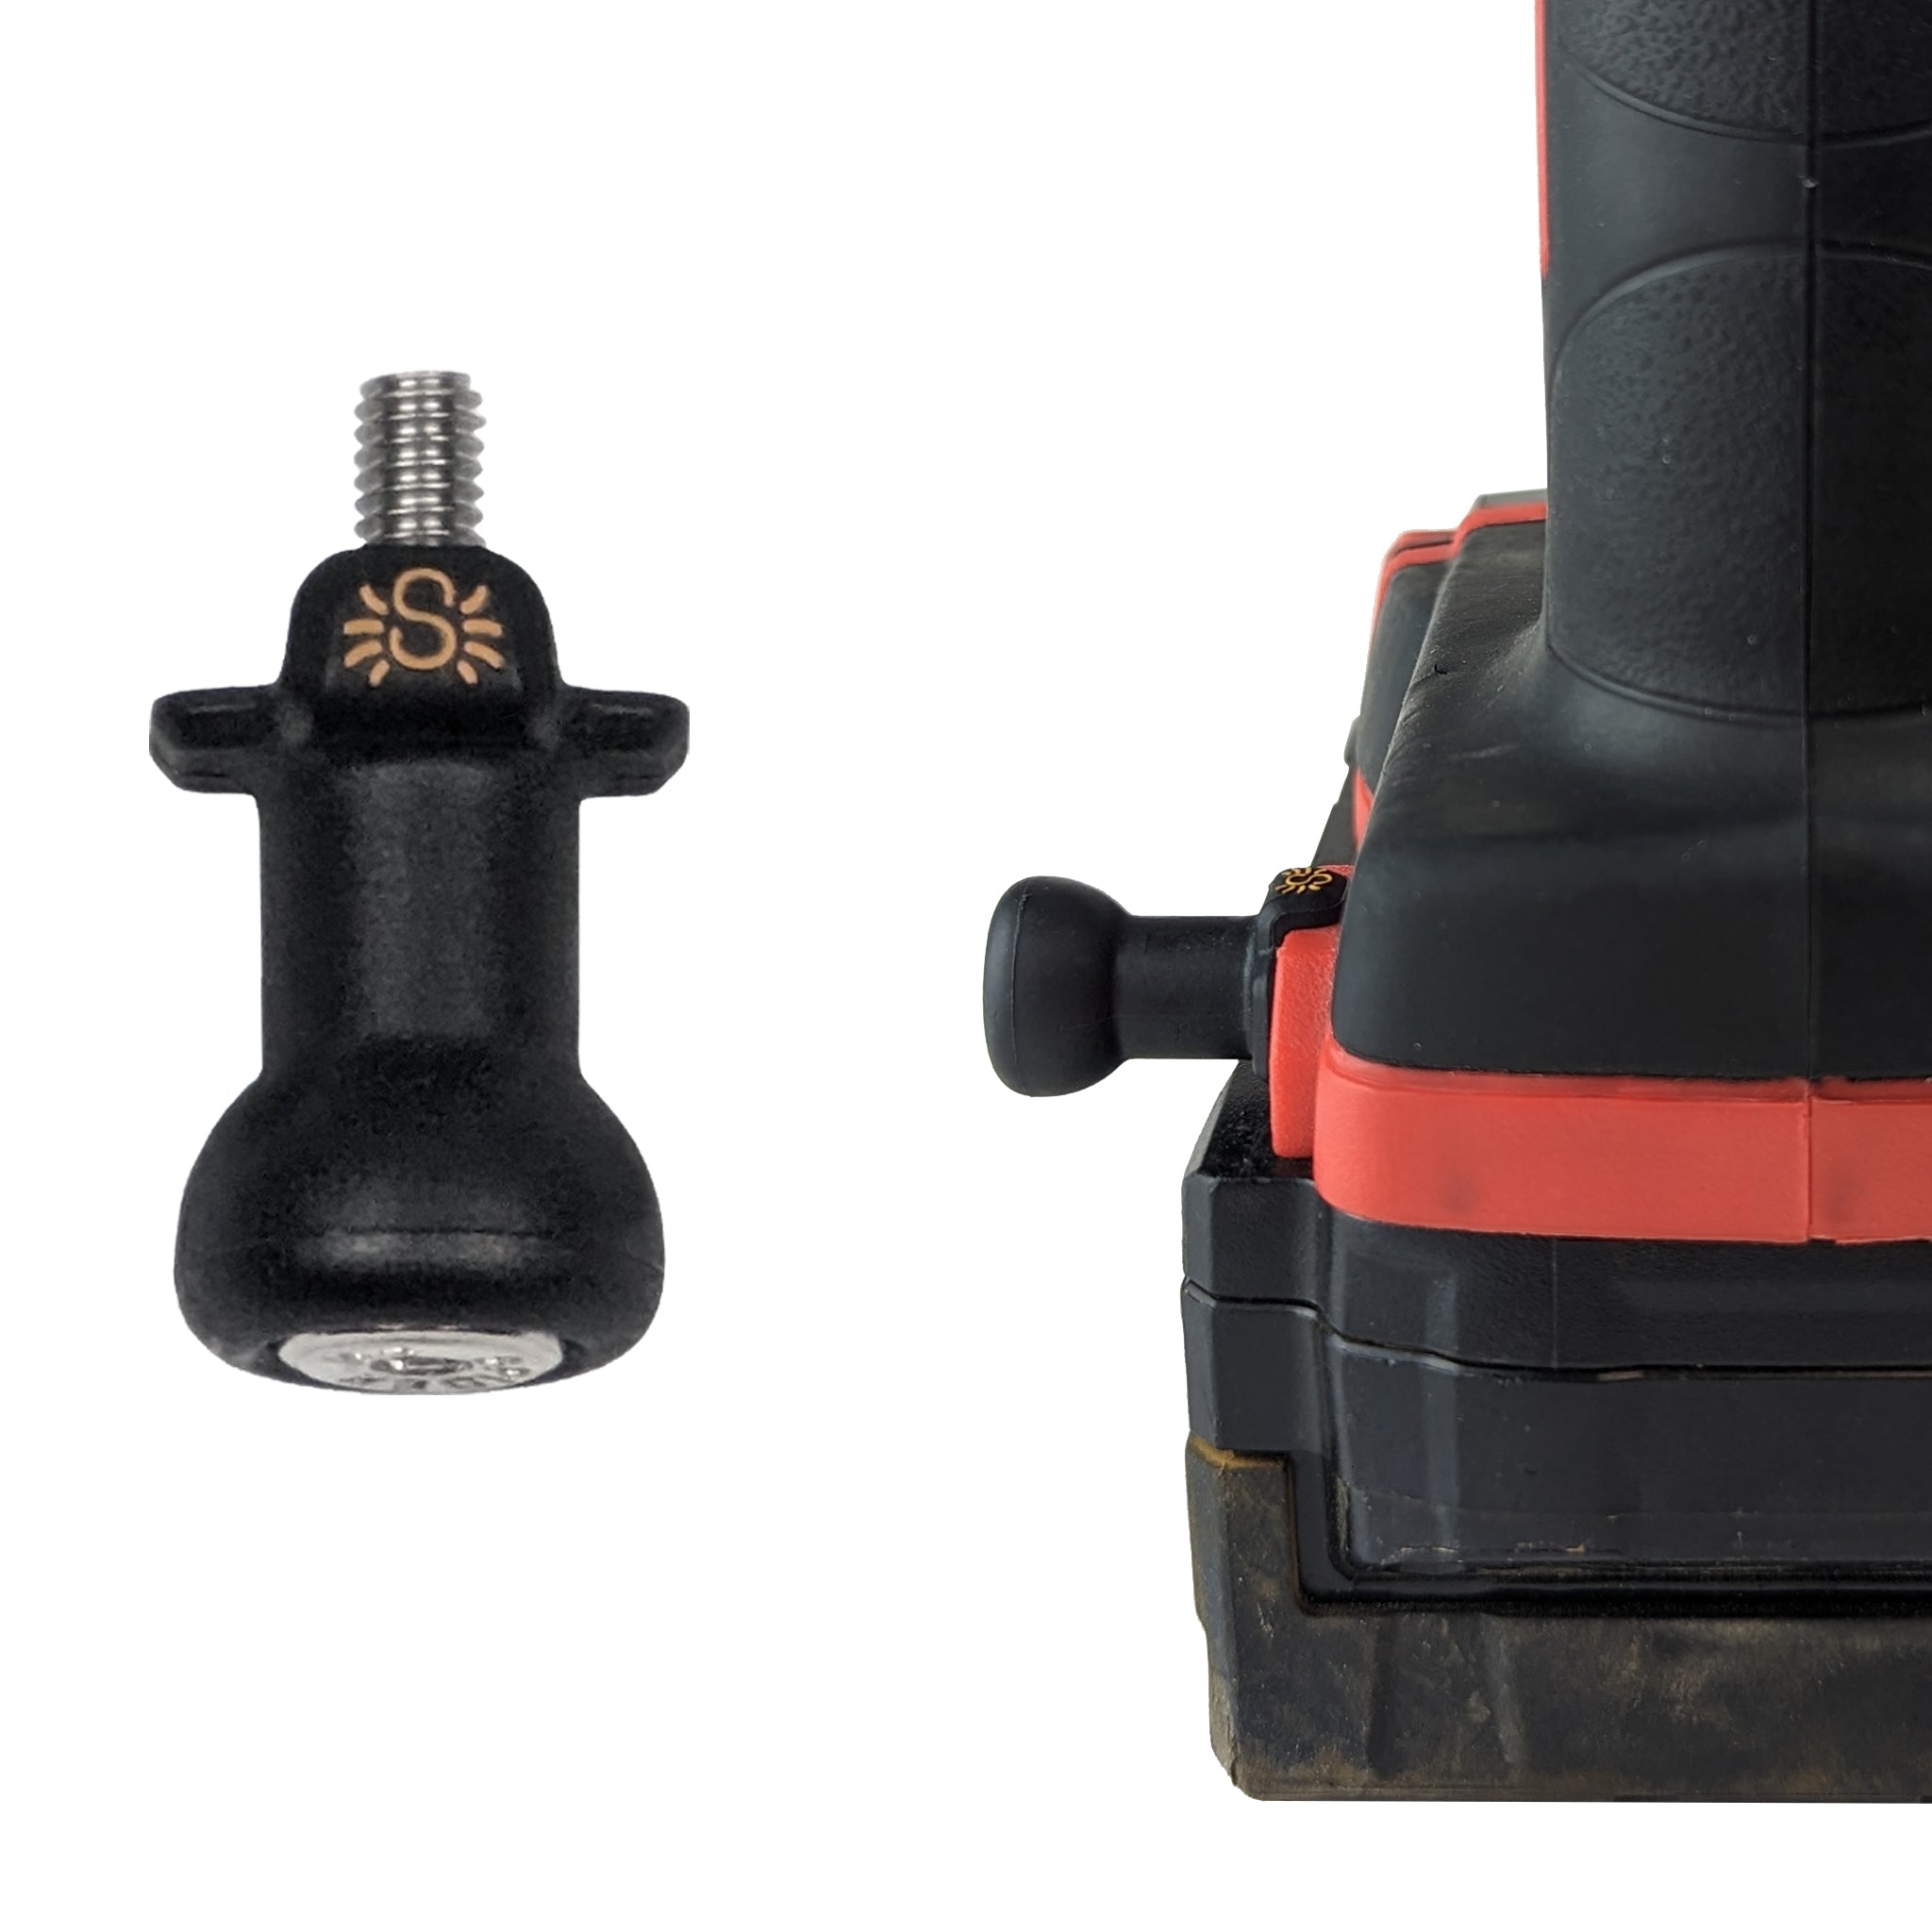 5100TH: Pro Tool Holster + 2 Drill Pins